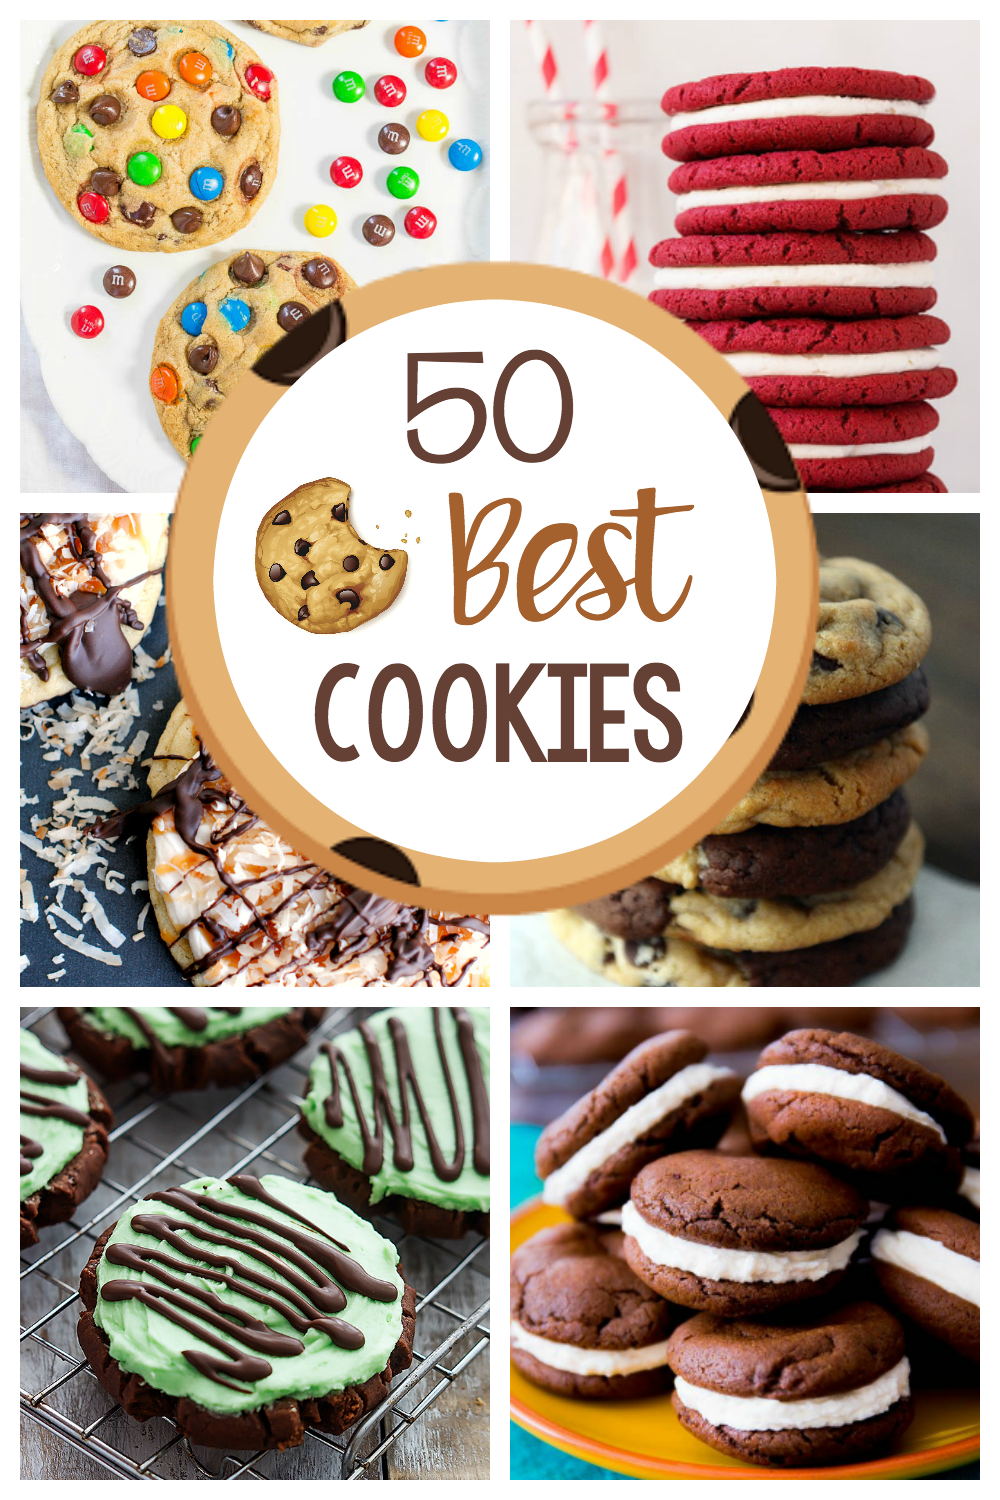 50 Best Cookies to Bake at Home